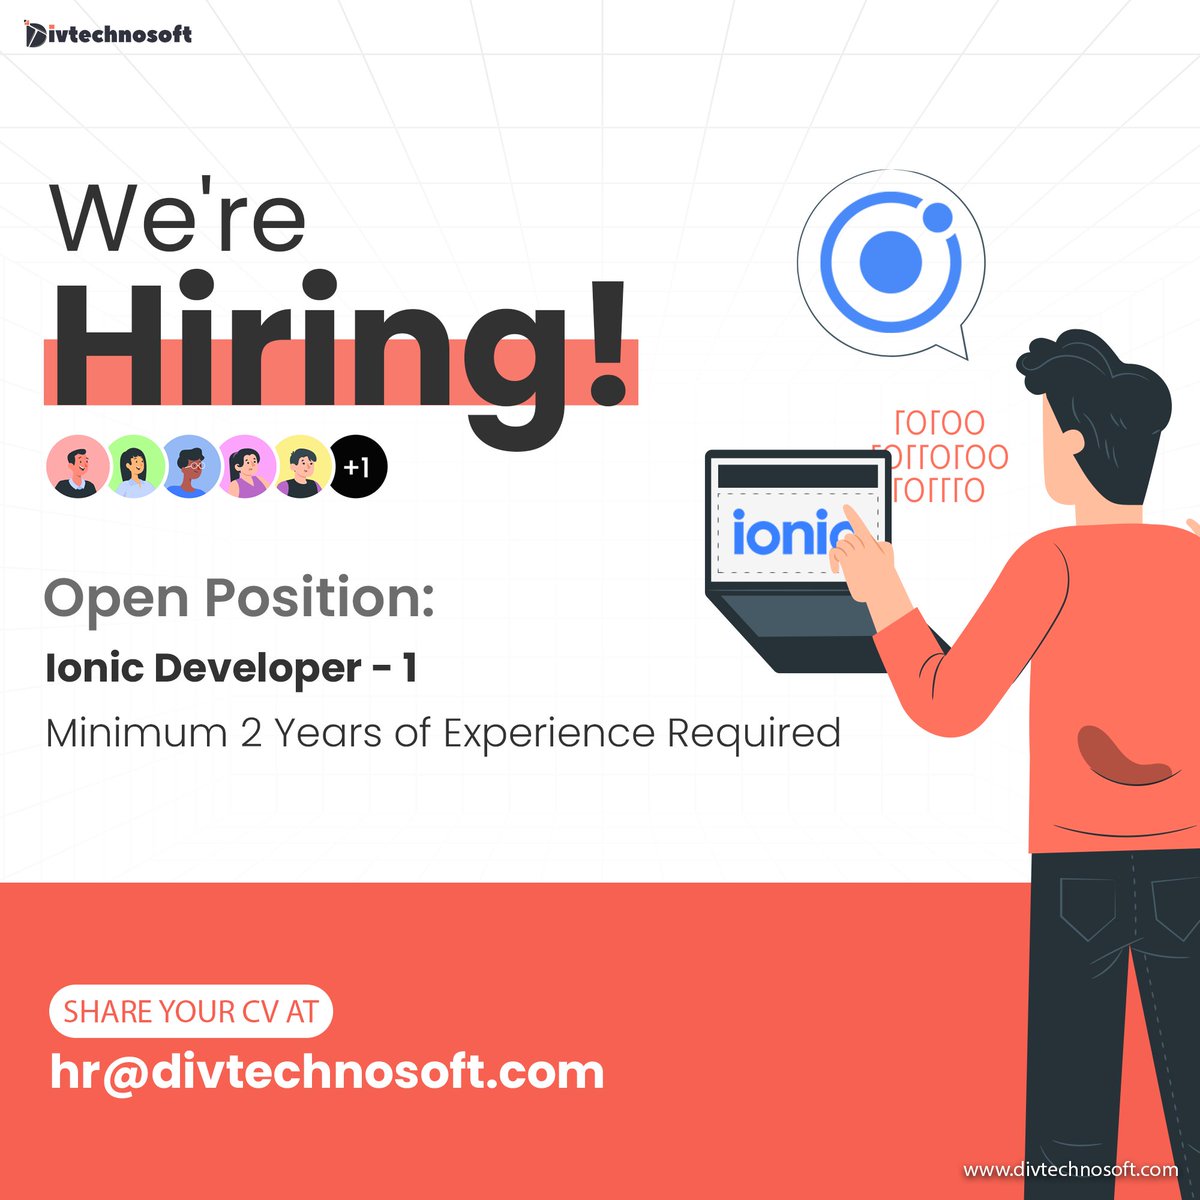 Join us and take the first step towards a #rewardingcareer with Divtechnosoft.
Send your CV to hr@divtechnosoft.com
divtechnosoft.com/career
#hiring #hiringnow #hiring2023 #hiringalert #hiringdeveloper #reactdeveloperjob #frontenddeveloper #ionicframework #ionic #reactnativejobs